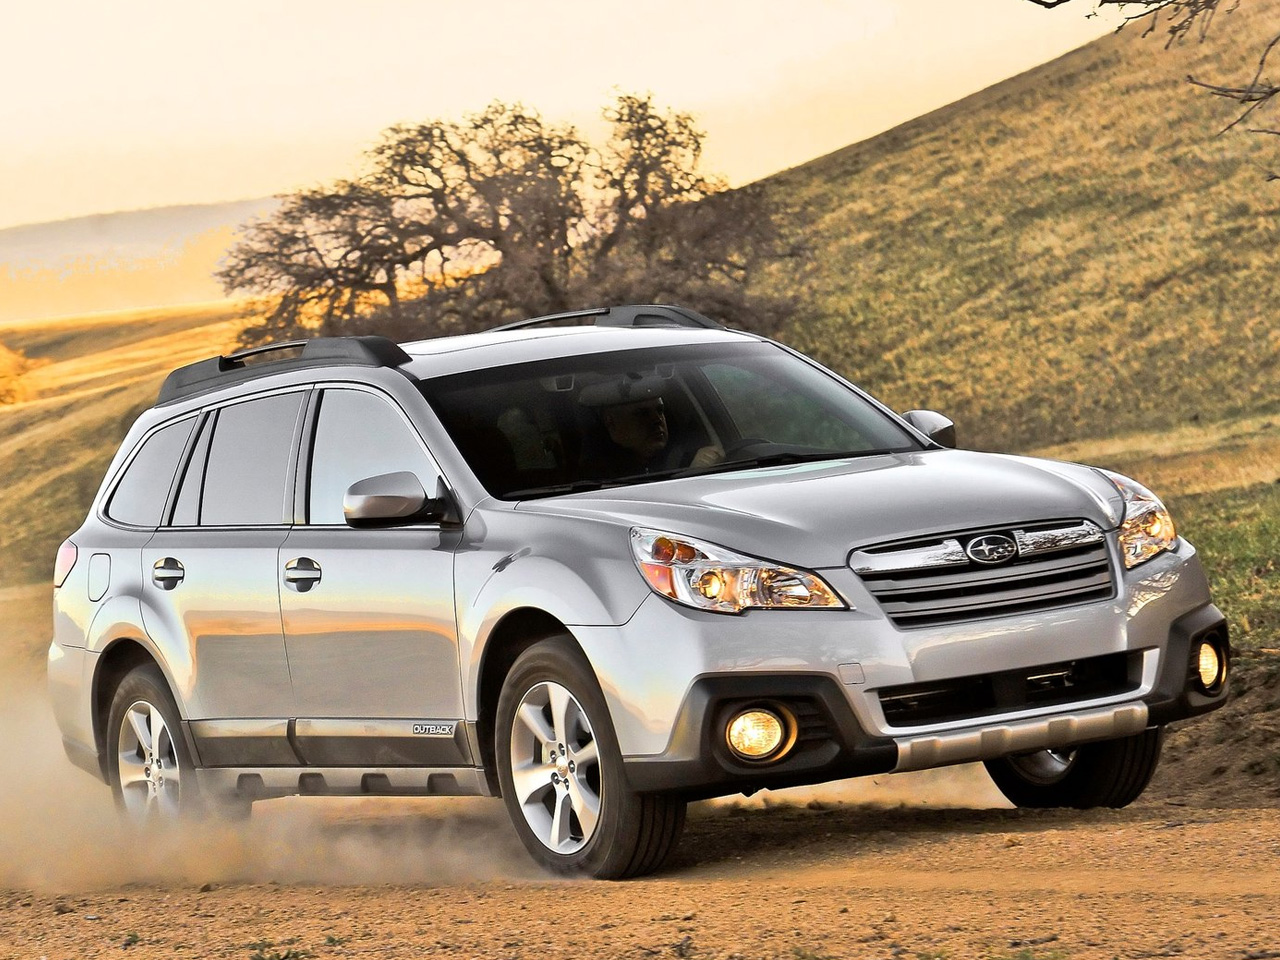 2013 Subaru Outback Review and Pictures Car Review